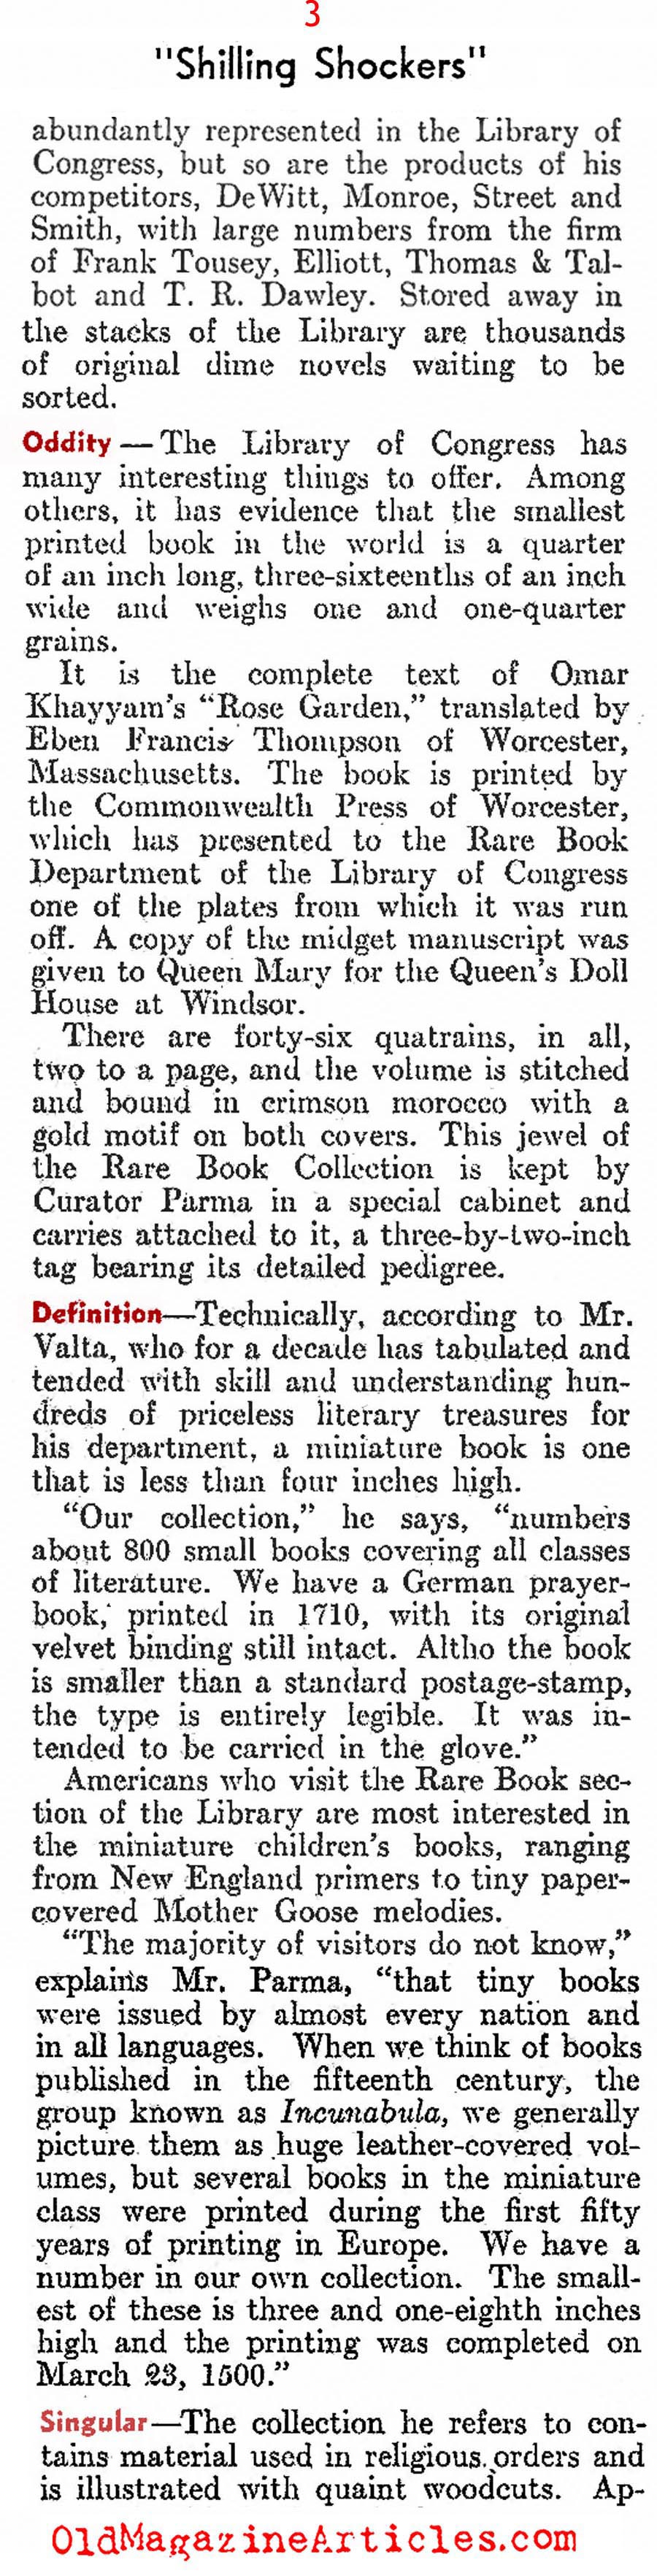 Library of Congress Salutes the Dime Novel (Literary Digest, 1937)